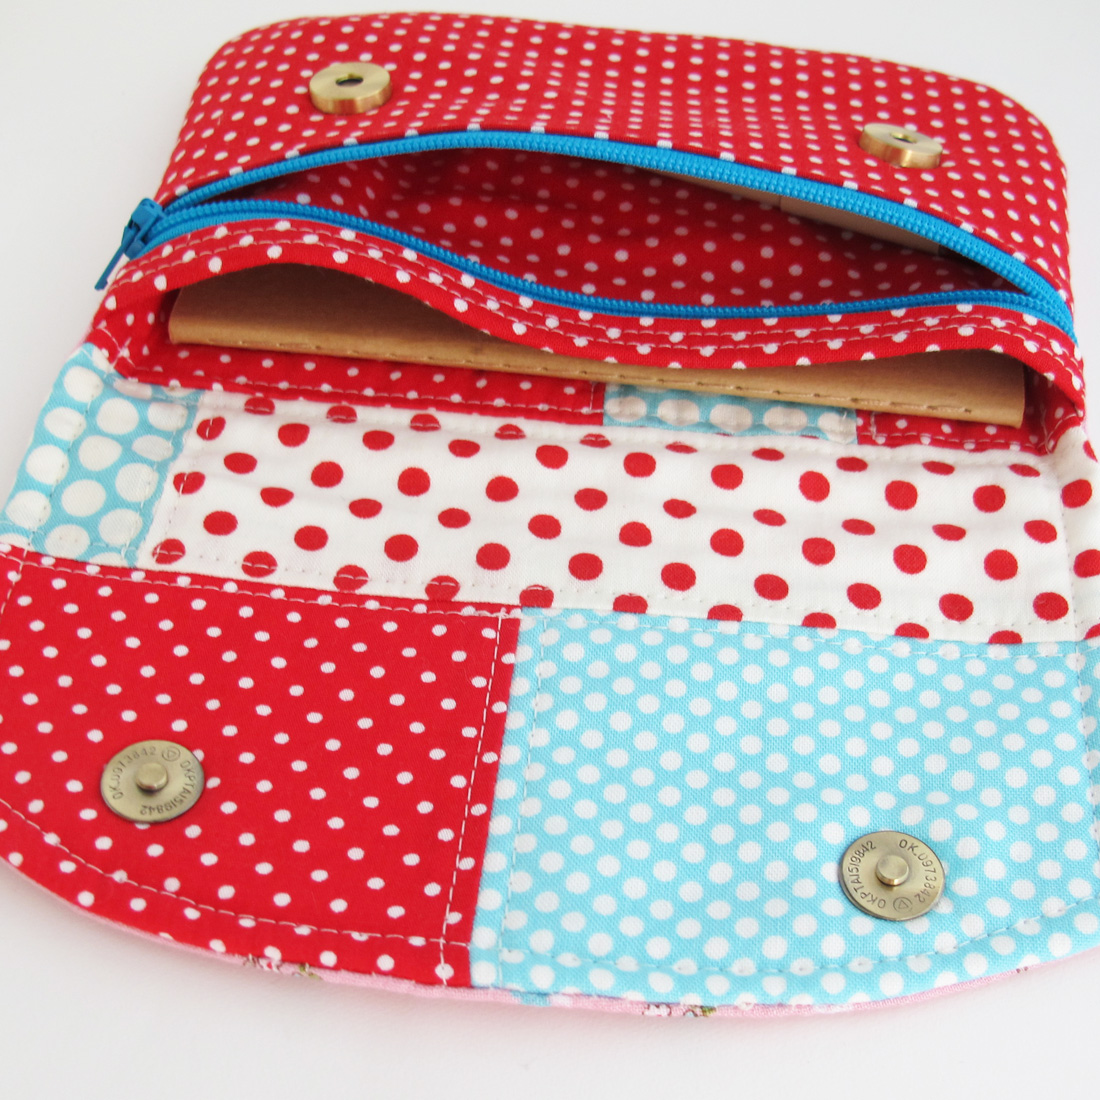 a piece of polka dotted fabric sitting in an empty pouch